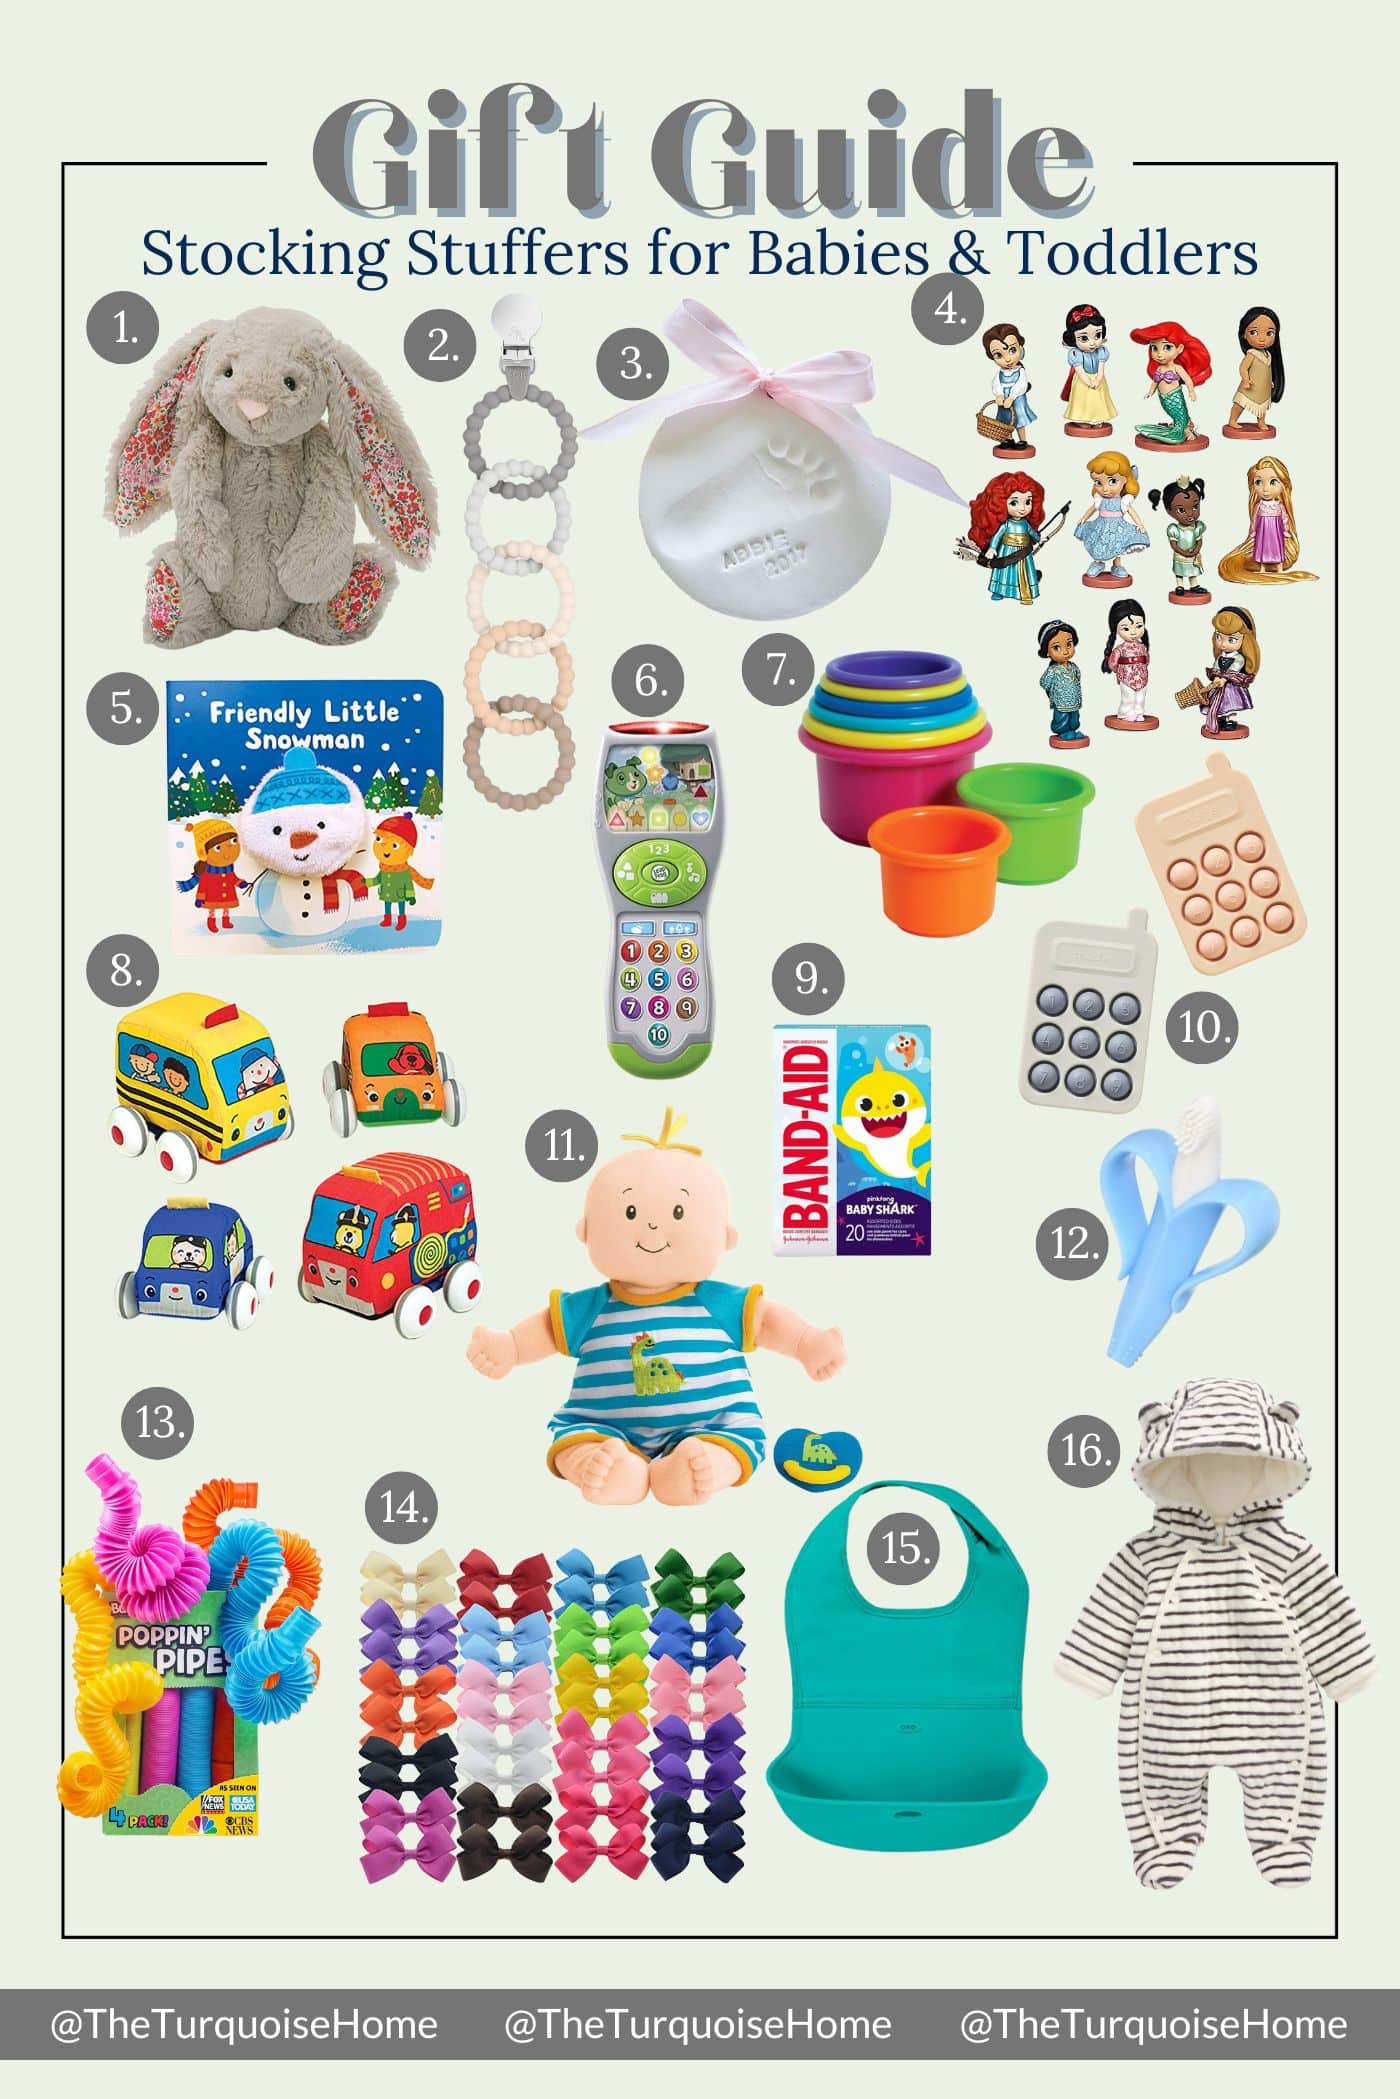 Stocking Stuffers for Babies & Toddlers